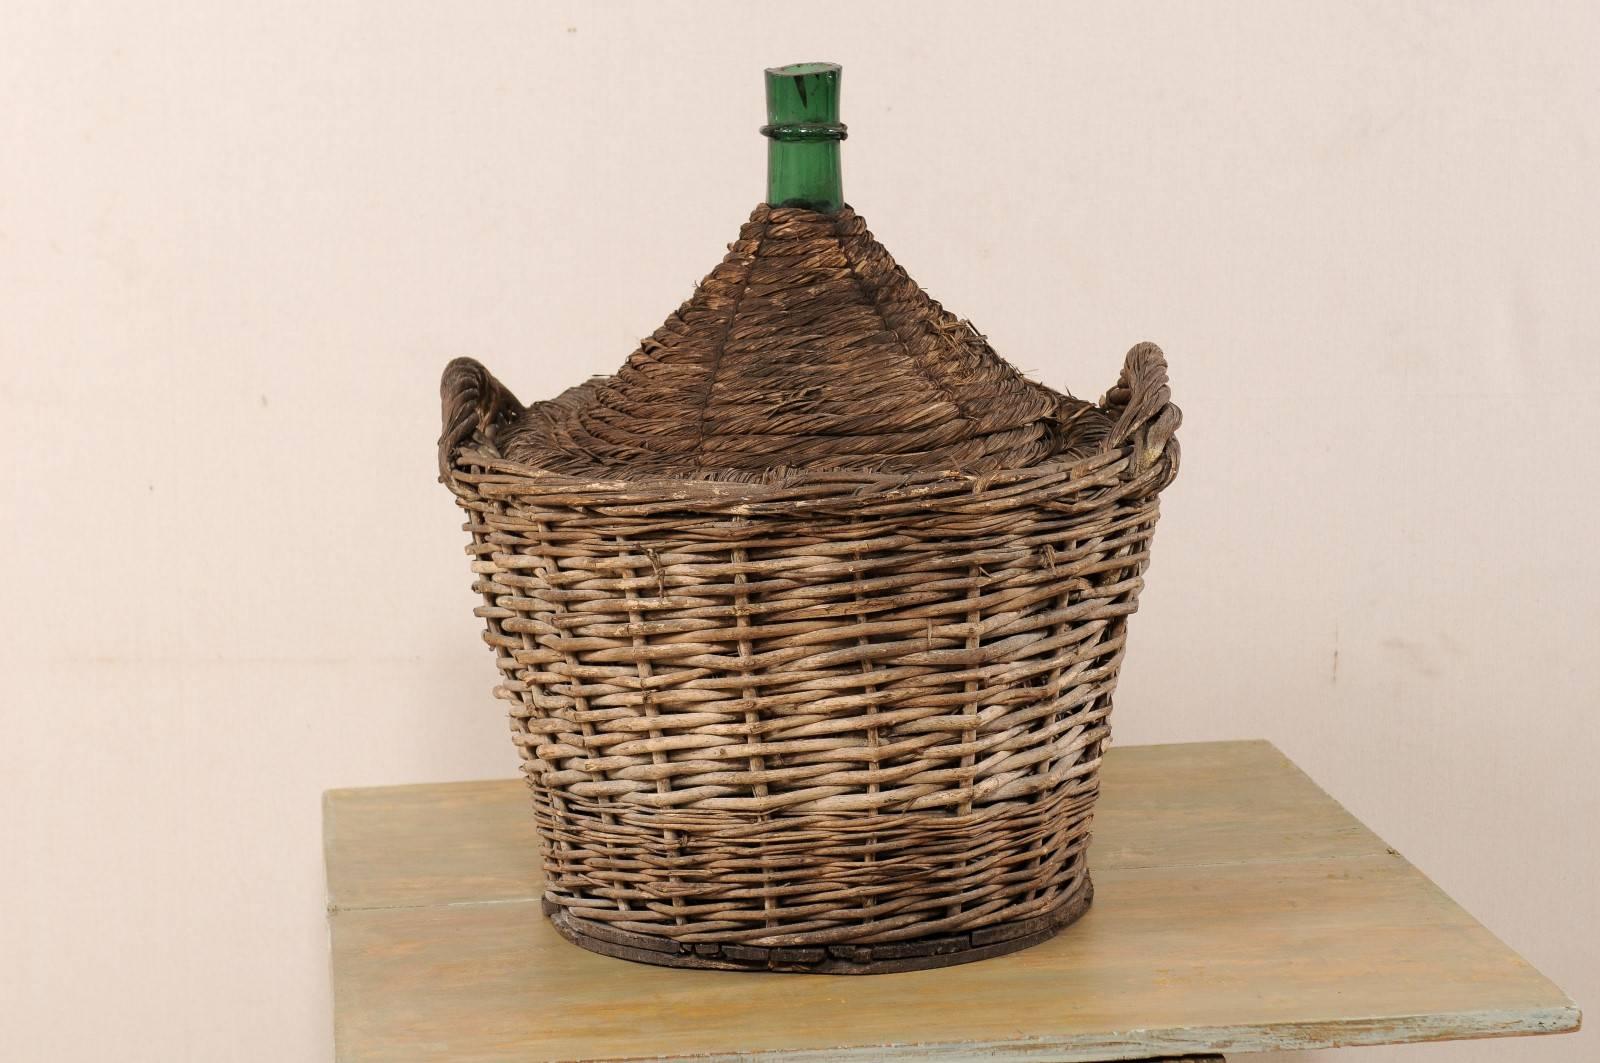 A Mid-Century French handwoven basket with demijohn wine bottle. This is a French two handle basket containing a large sized, green, demijohn wine bottle. The basket is hand woven and nicely aged. This French basket and demijohn bottle from the